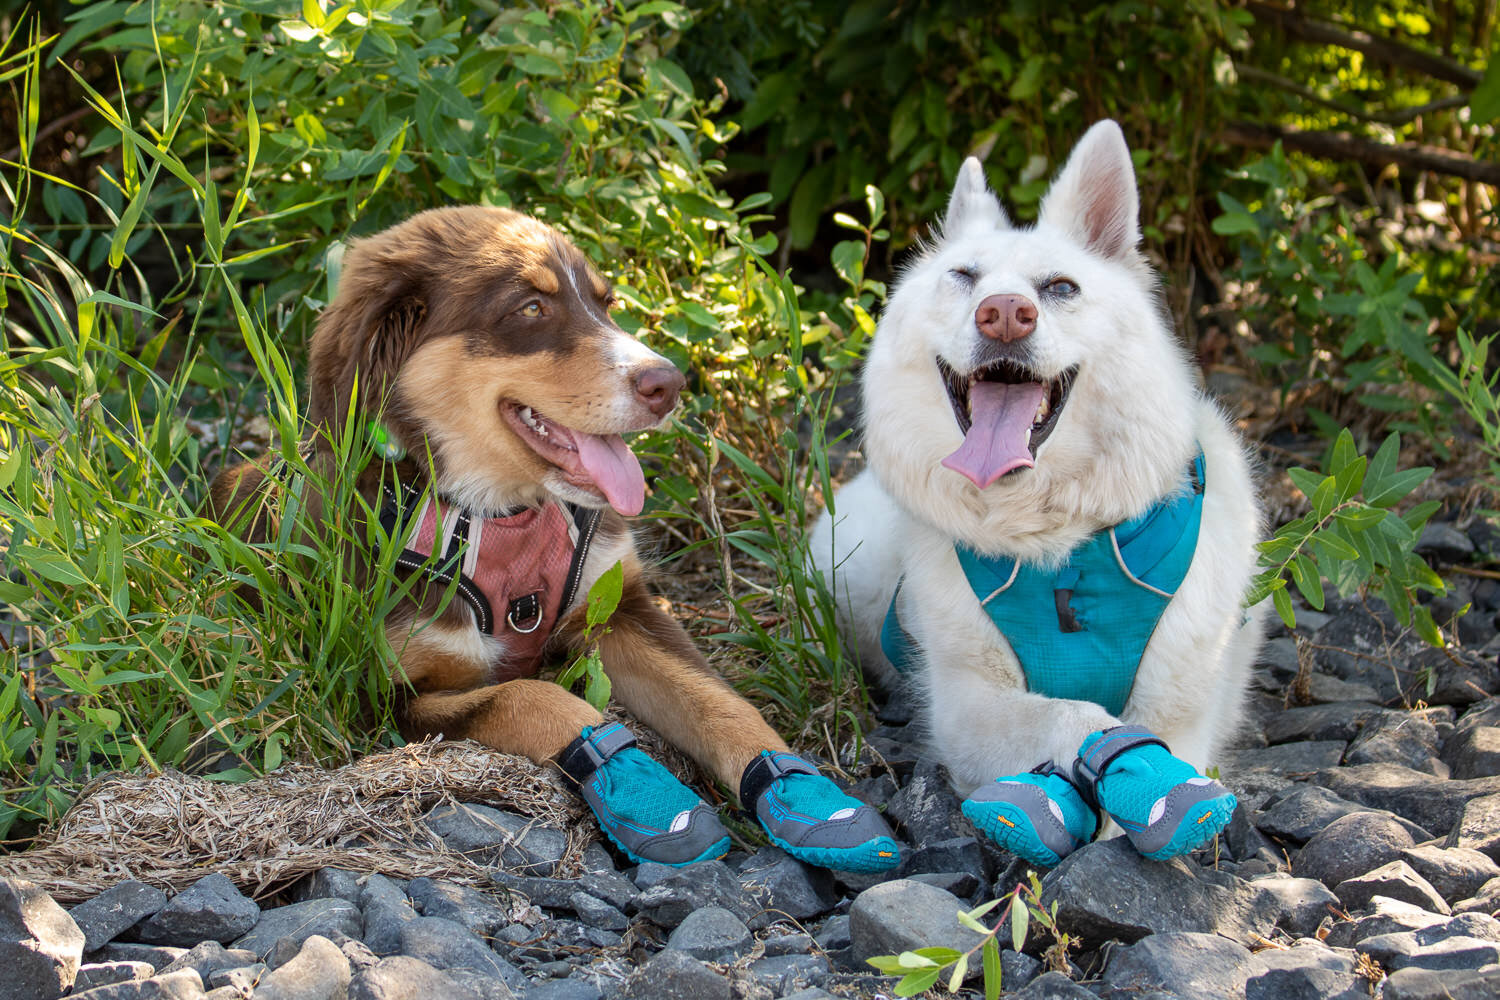 The Ruffwear Grip Trex are sold in sets of two to accommodate dogs with different size front and back paws